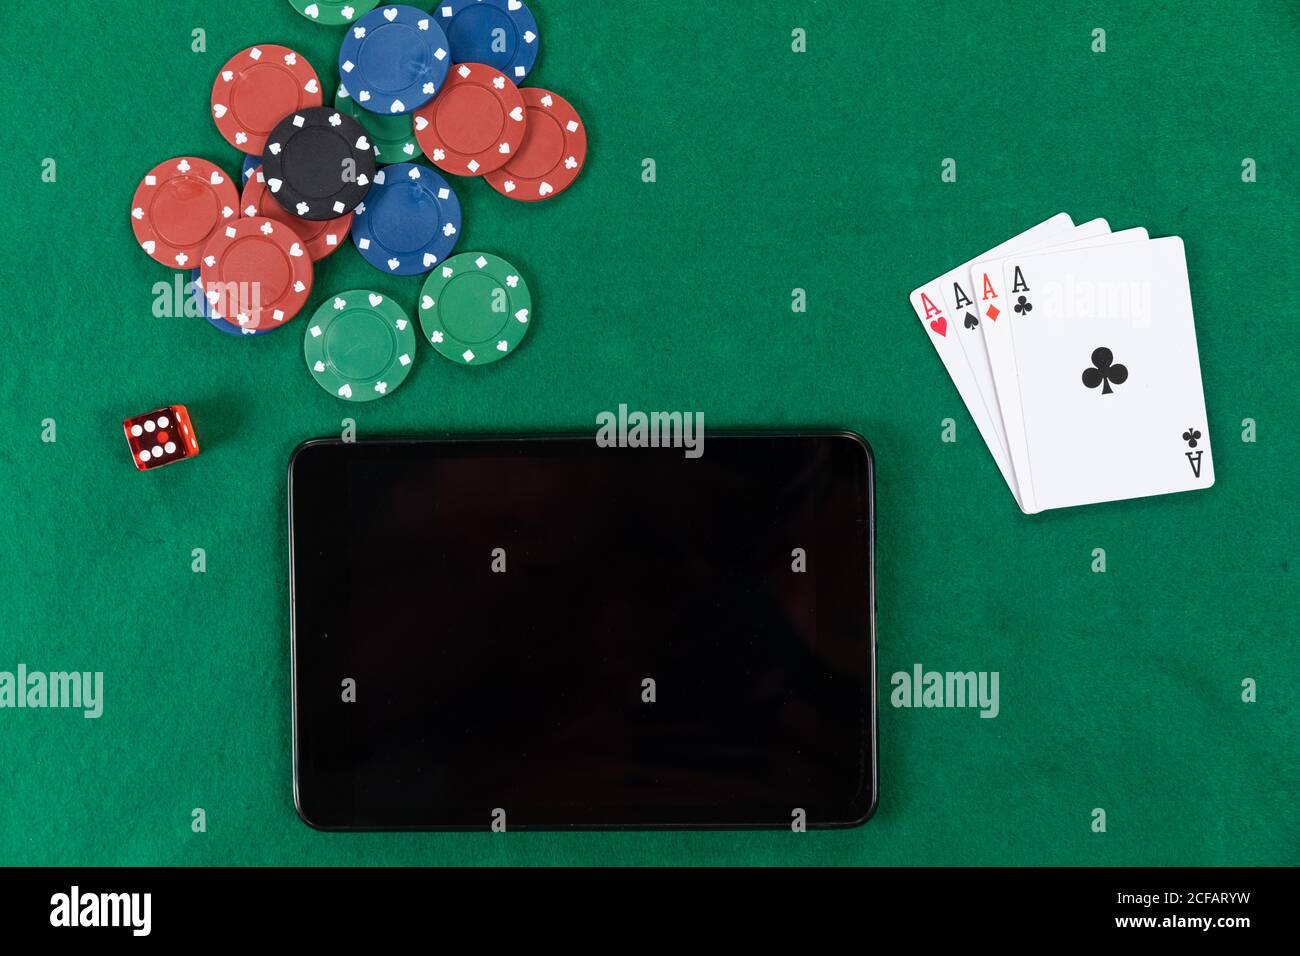 View of a black tablet, playing cards, a red dice and colorful tokens on plain green surface Stock Photo